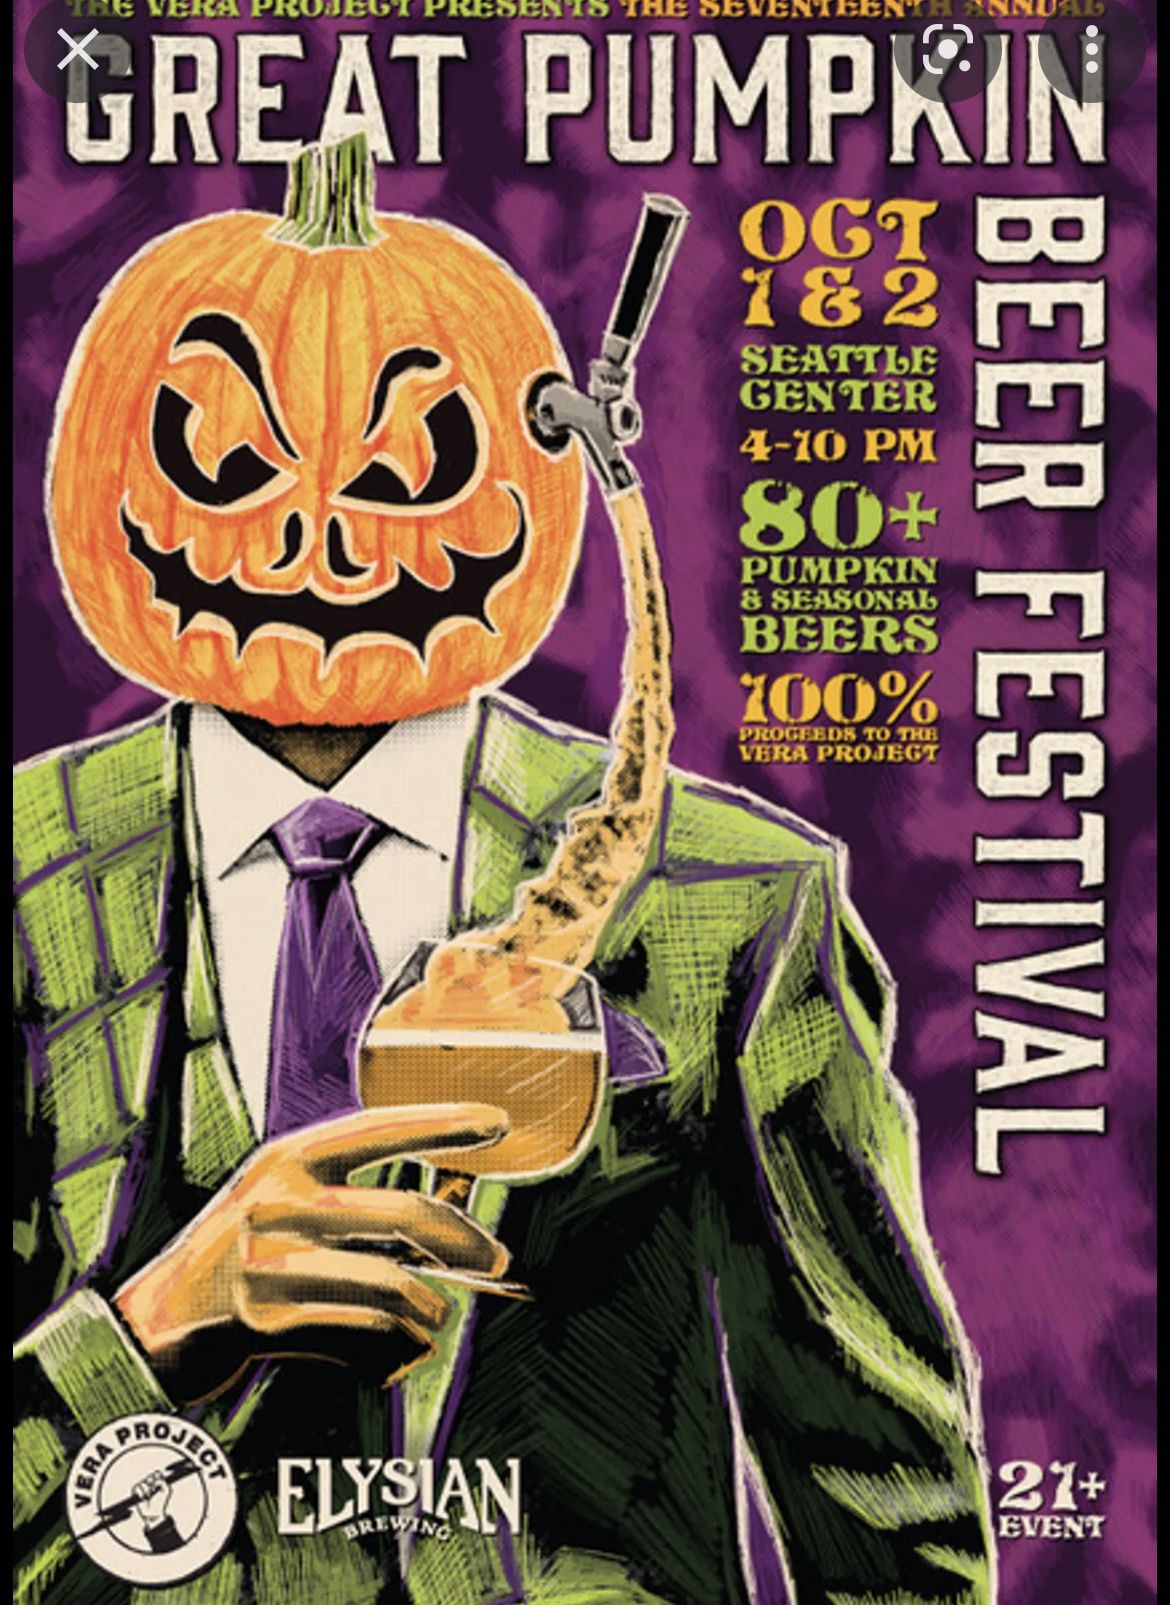 2 Tickets To The Great Pumpkin Beer Festival 